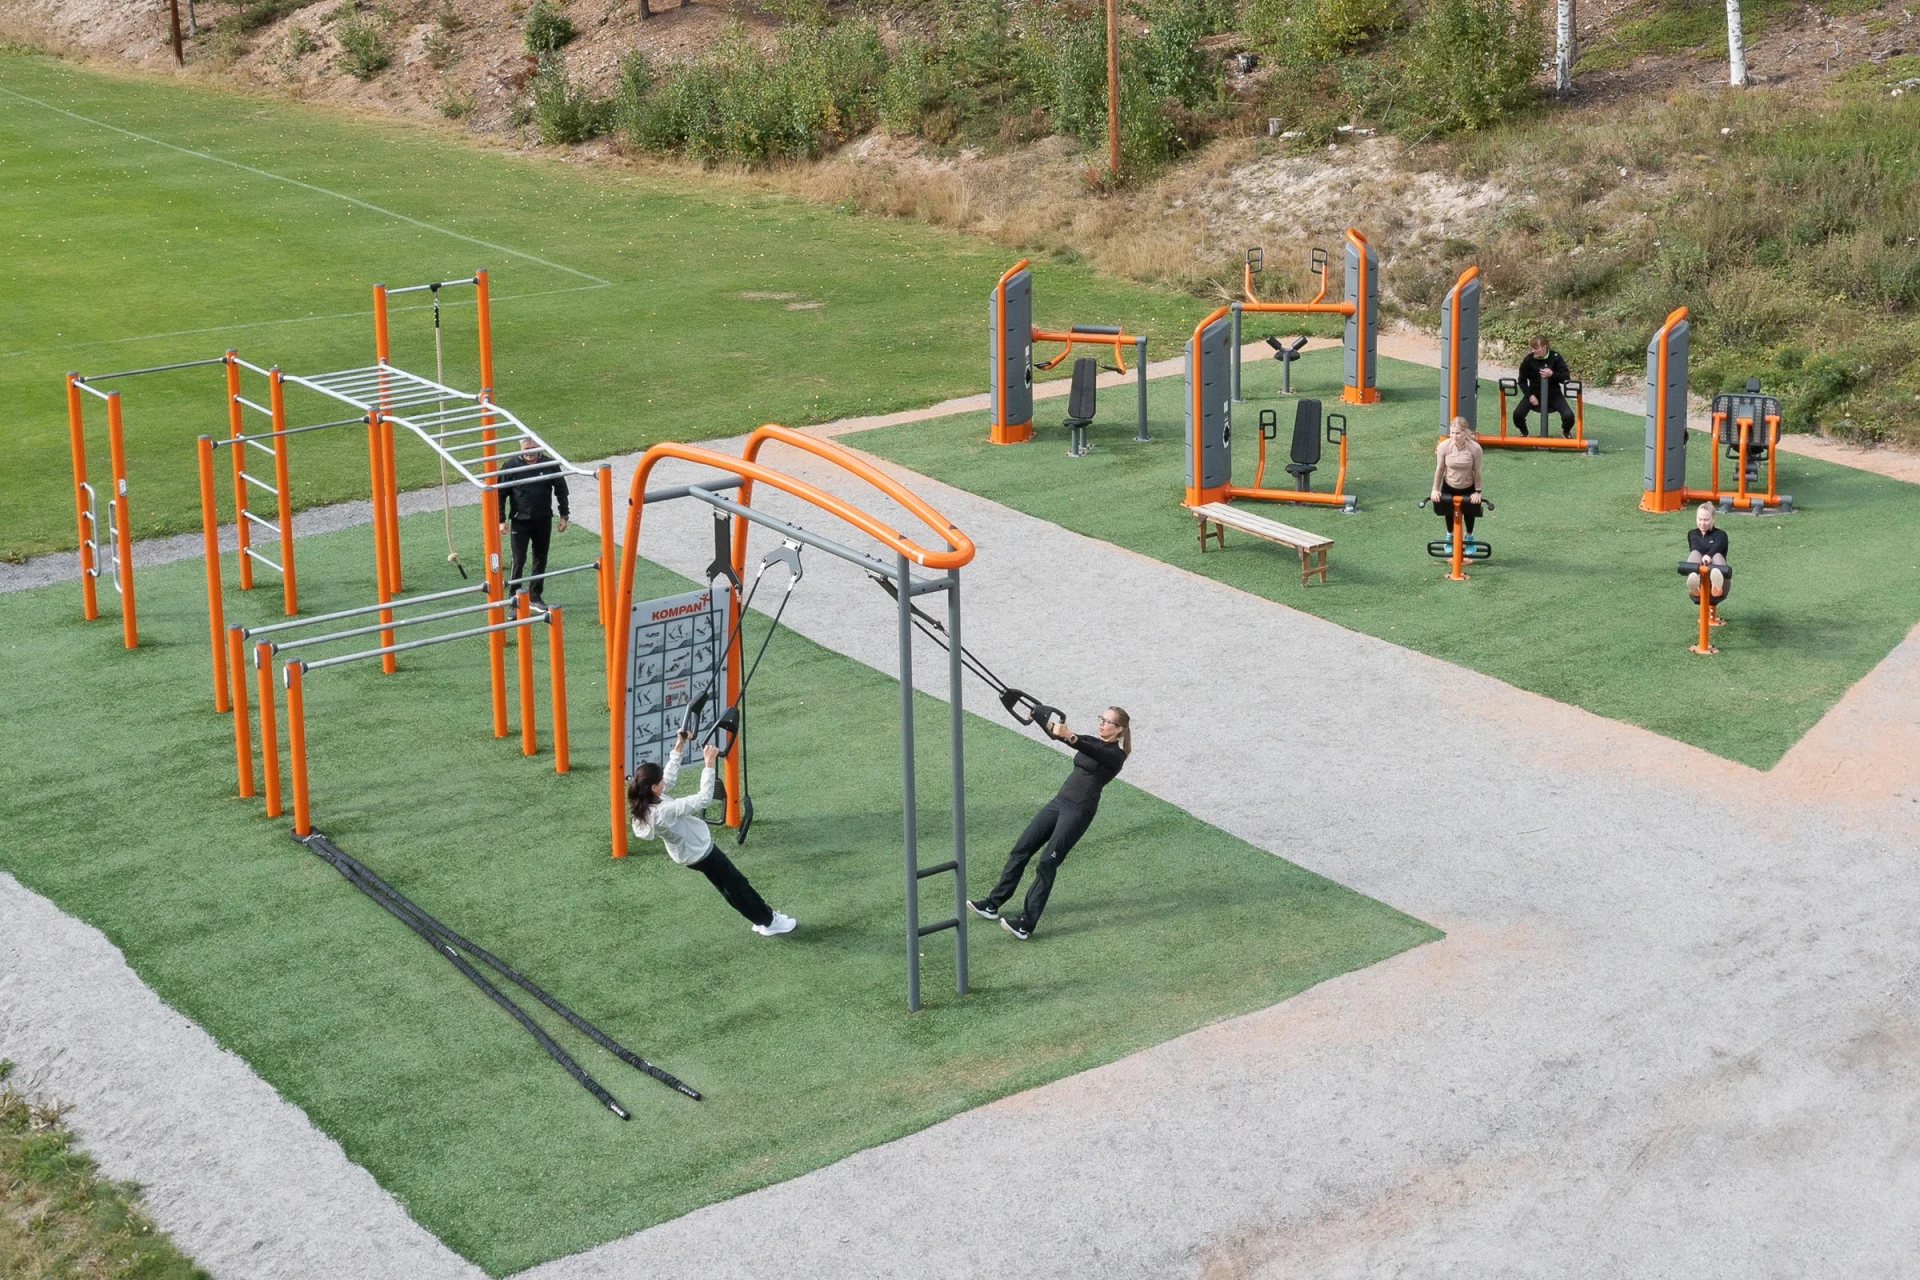 Picture of an outdoor fitness area designed in different zones